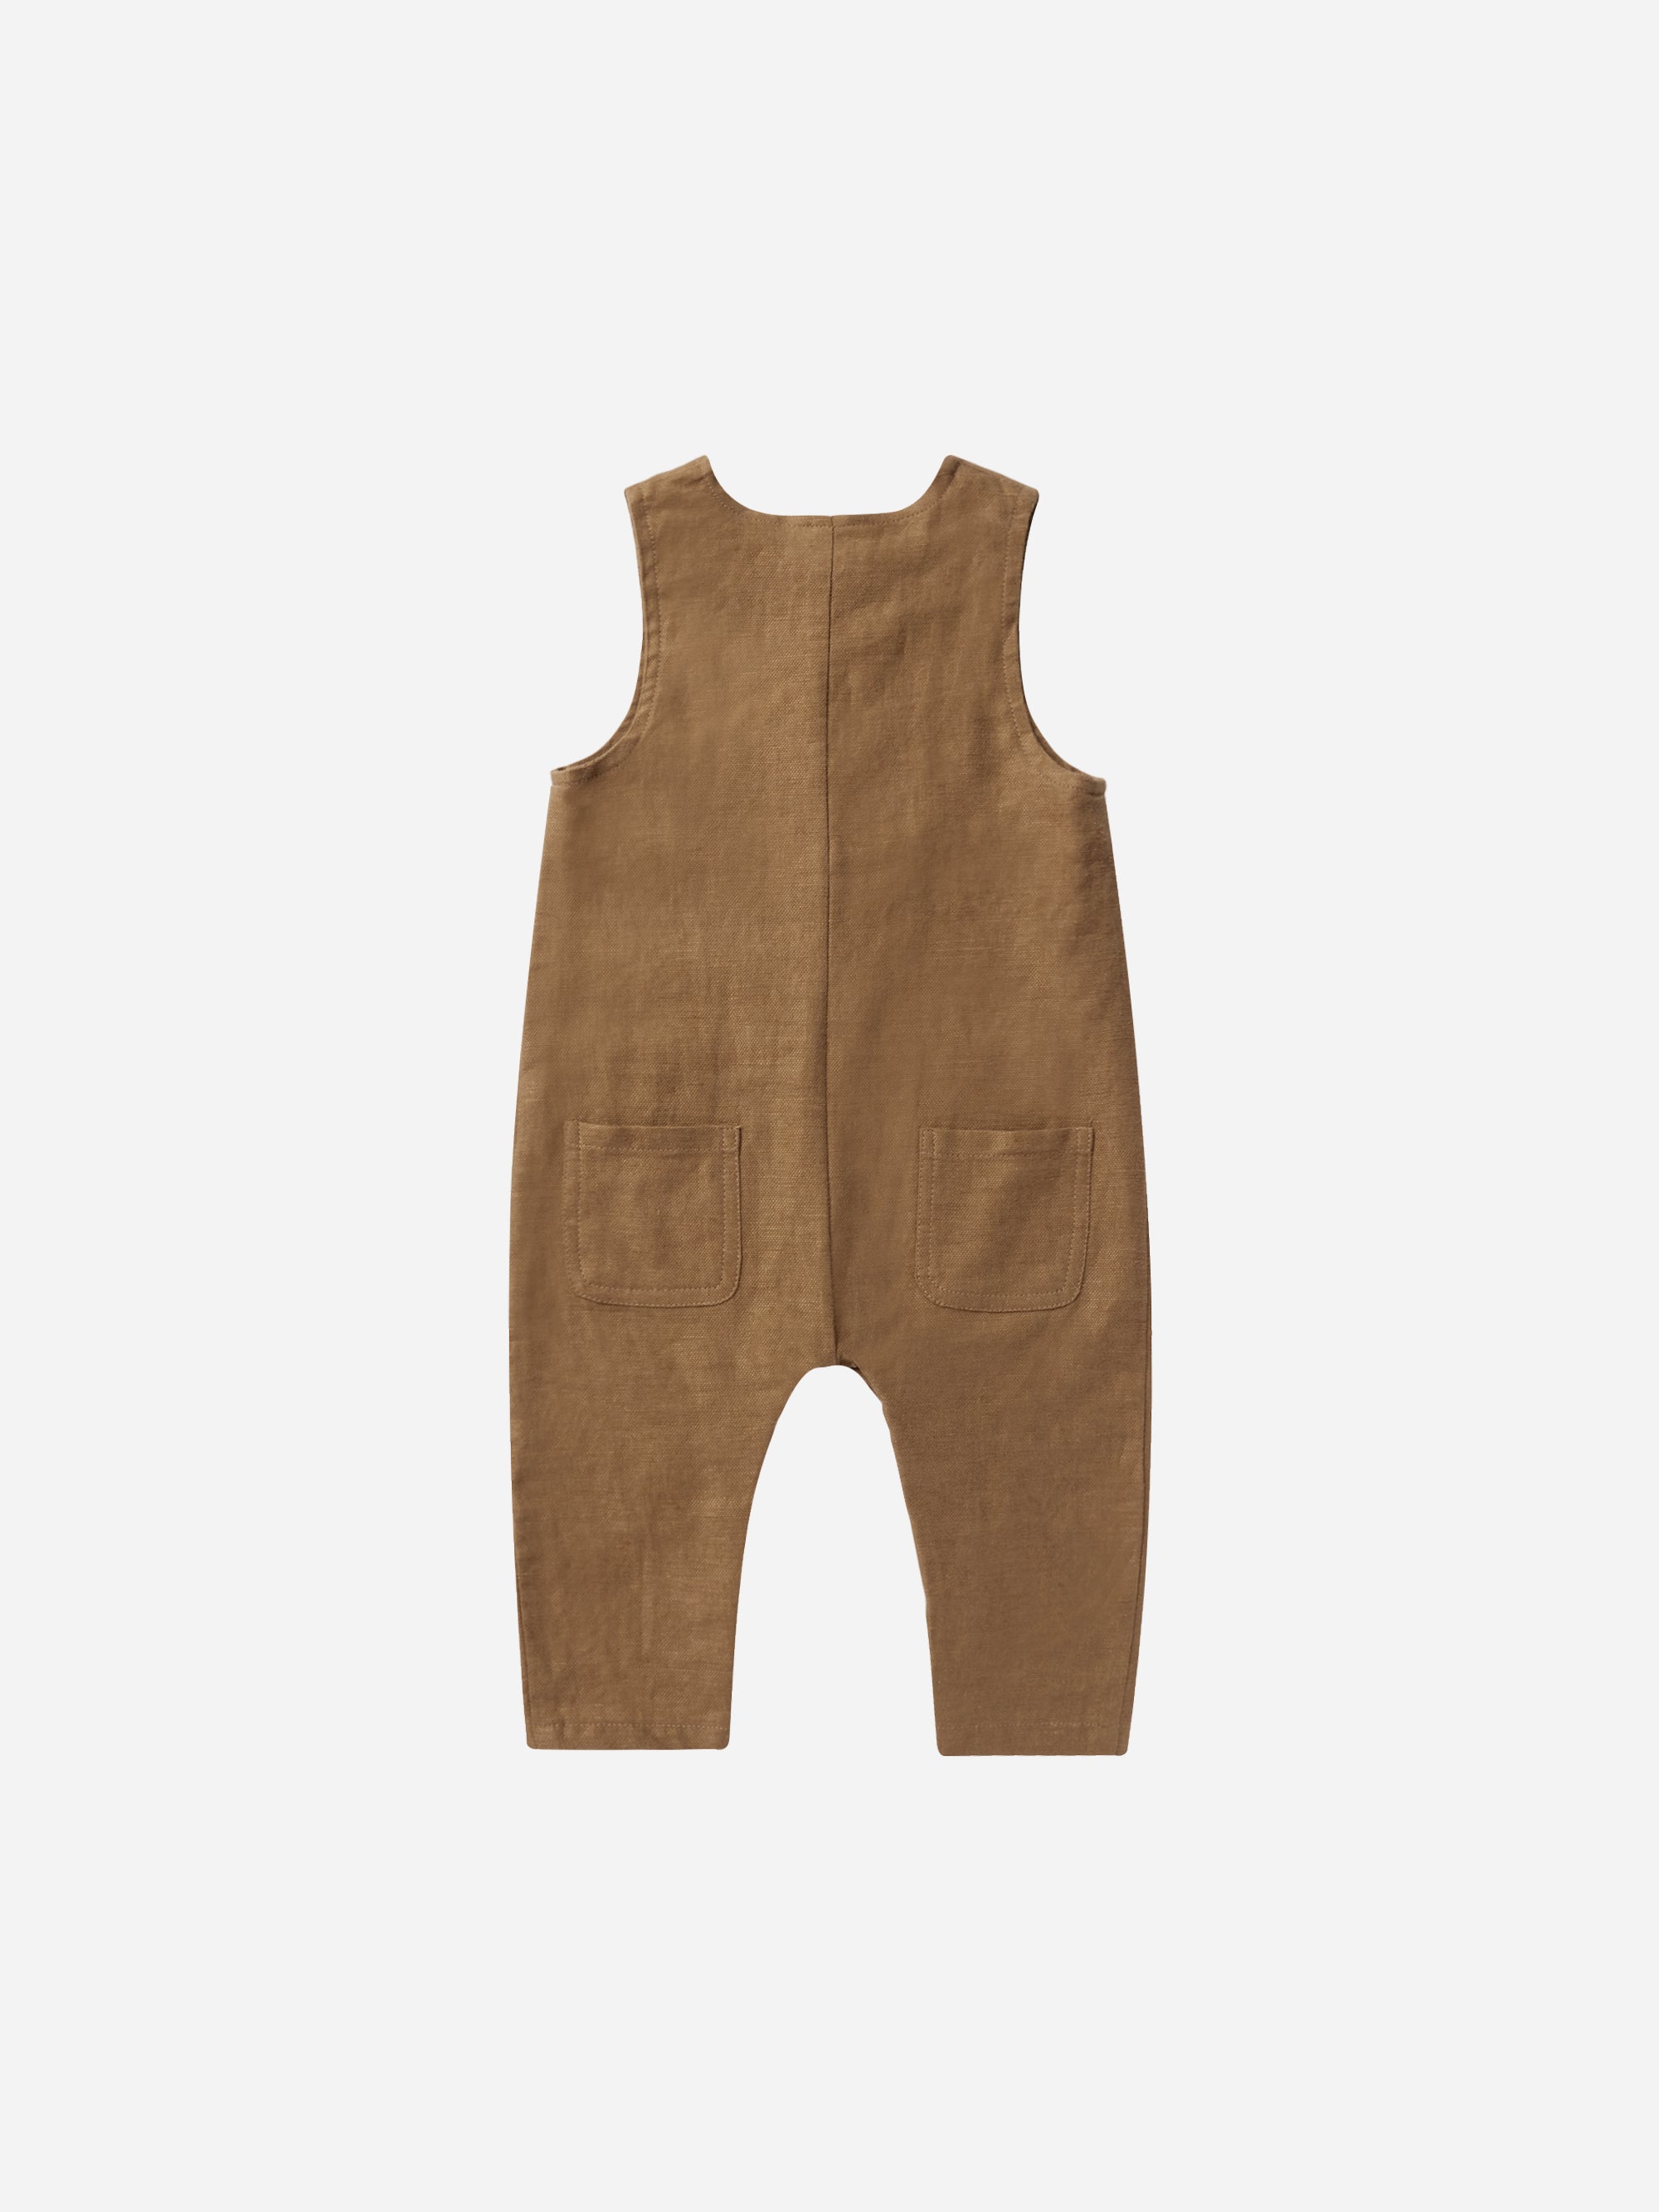 Button Jumpsuit || Saddle - Rylee + Cru | Kids Clothes | Trendy Baby Clothes | Modern Infant Outfits |